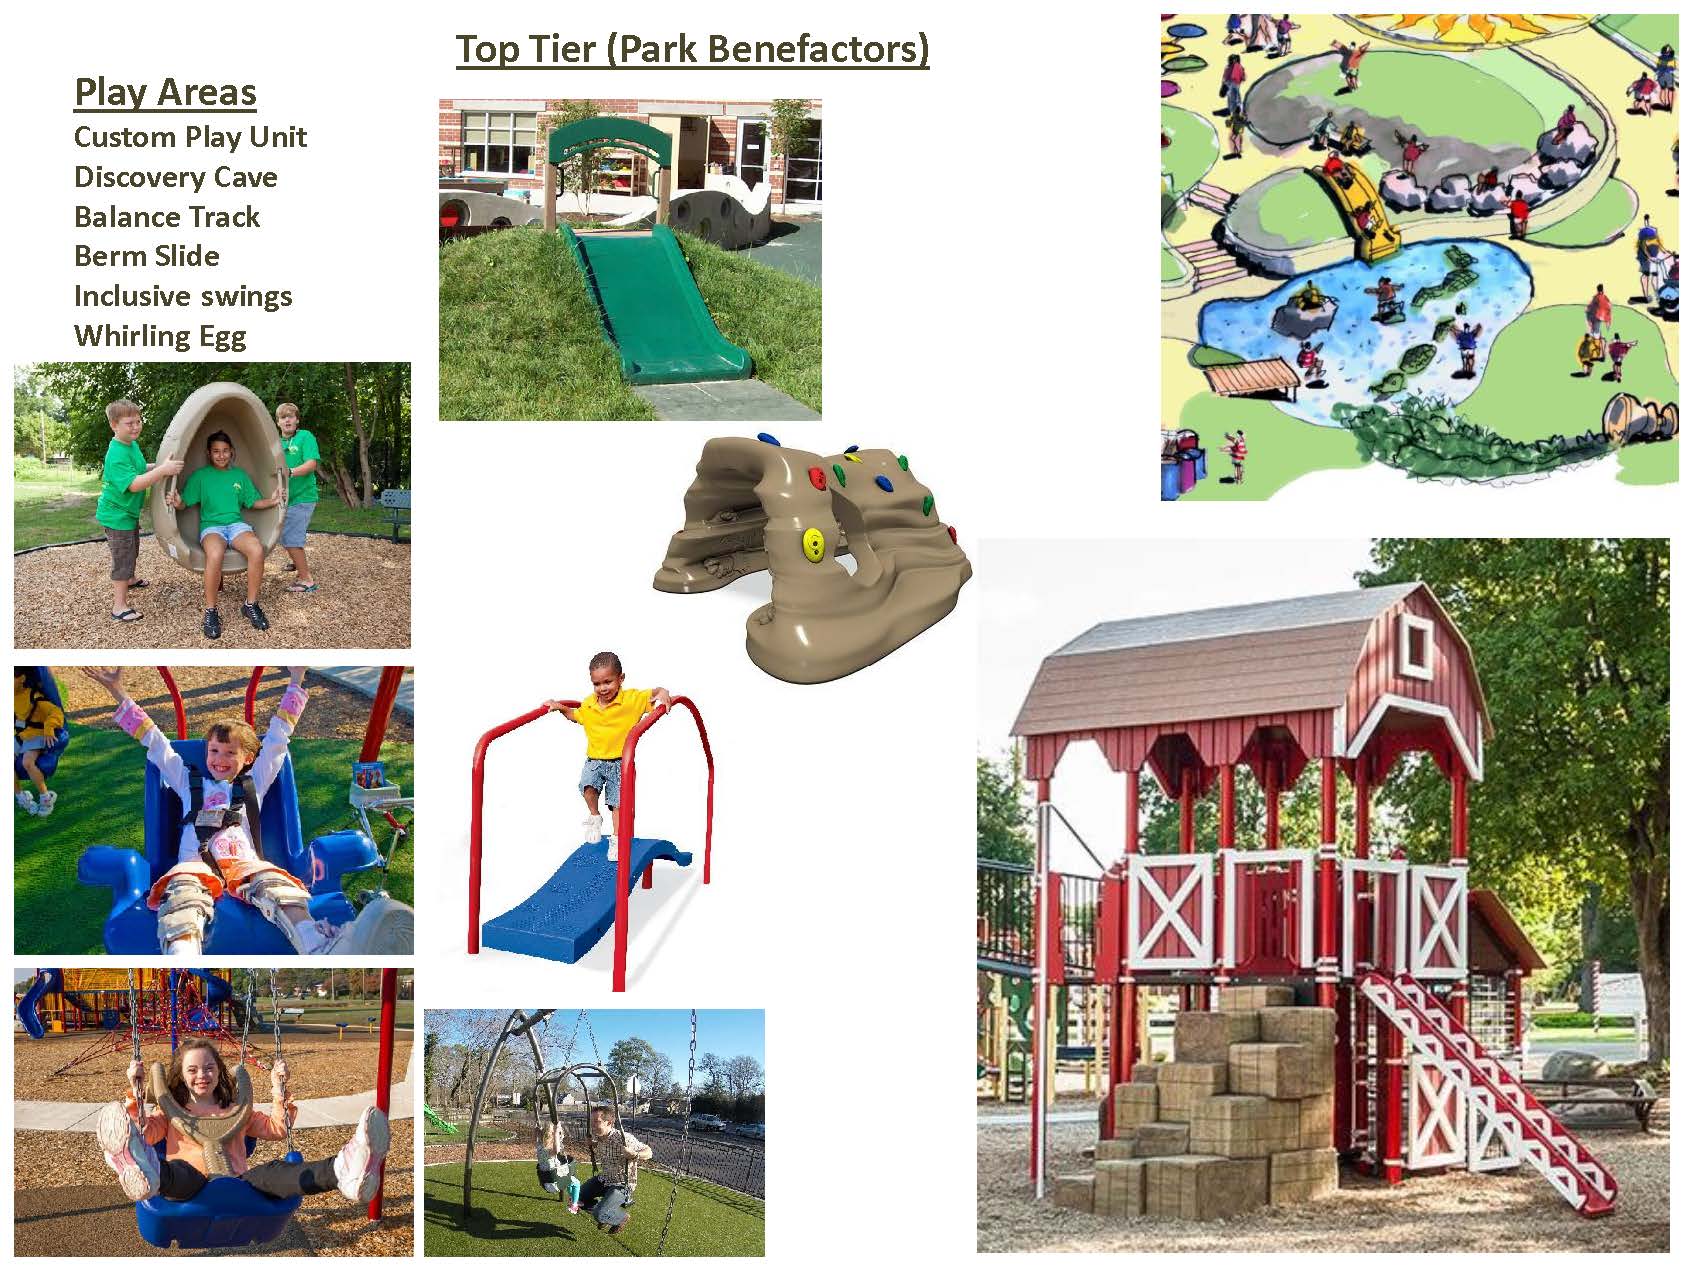 Zachary_PlaygroundPhaseII_Naming Opportunities_Page_04.jpg